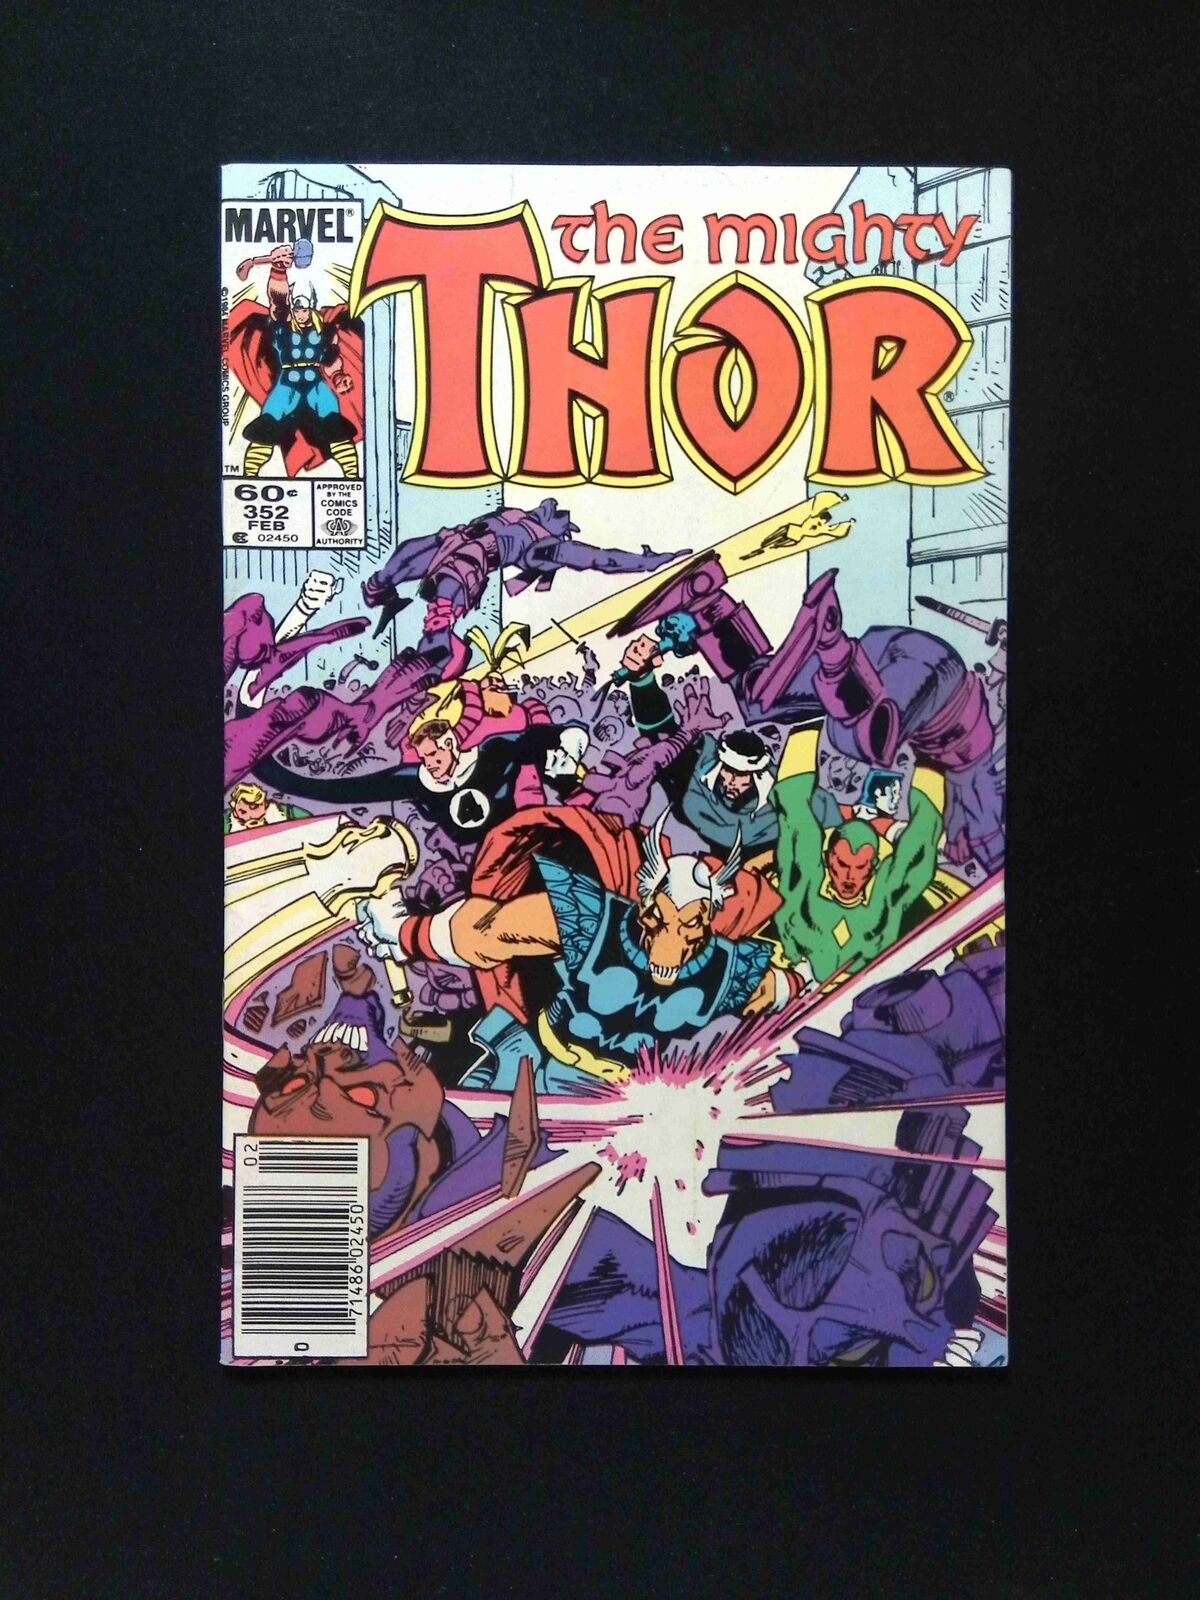 The Mighty Thor #352  MARVEL Comics 1985 VF+ NEWSSTAND